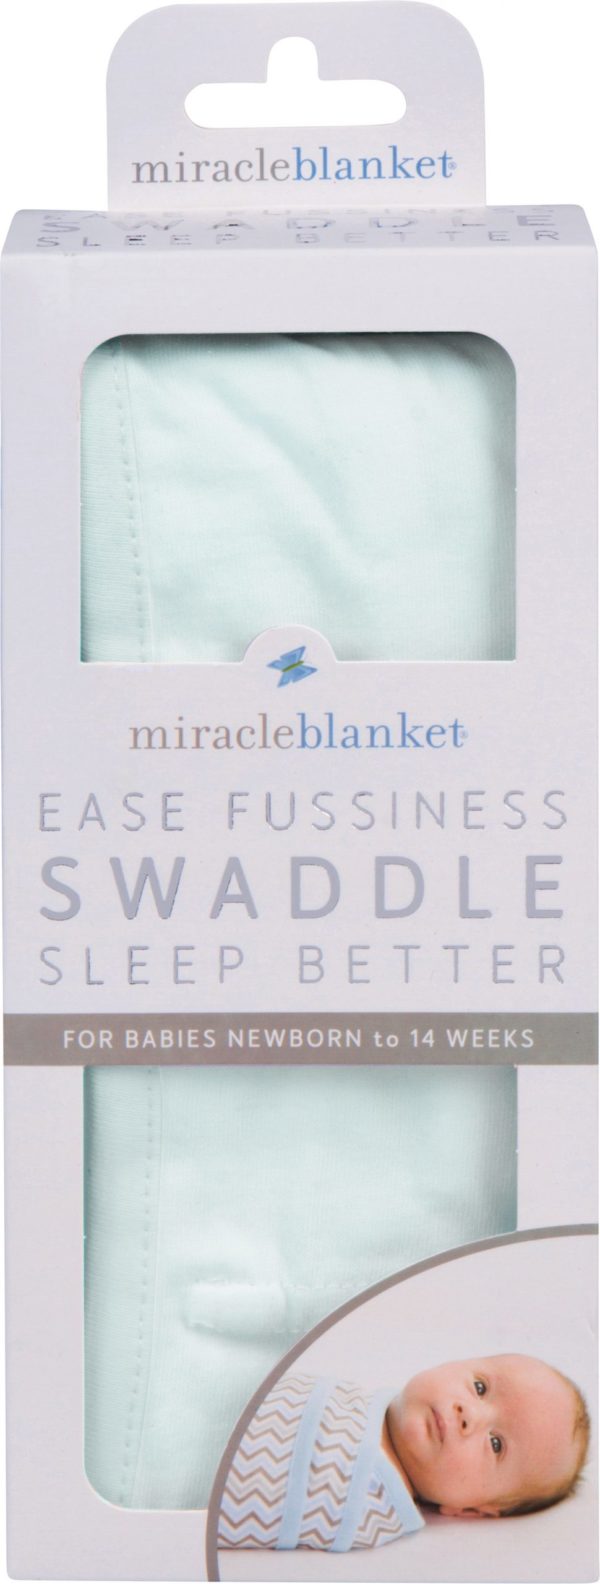 Mint Miracle Blanket Image 2